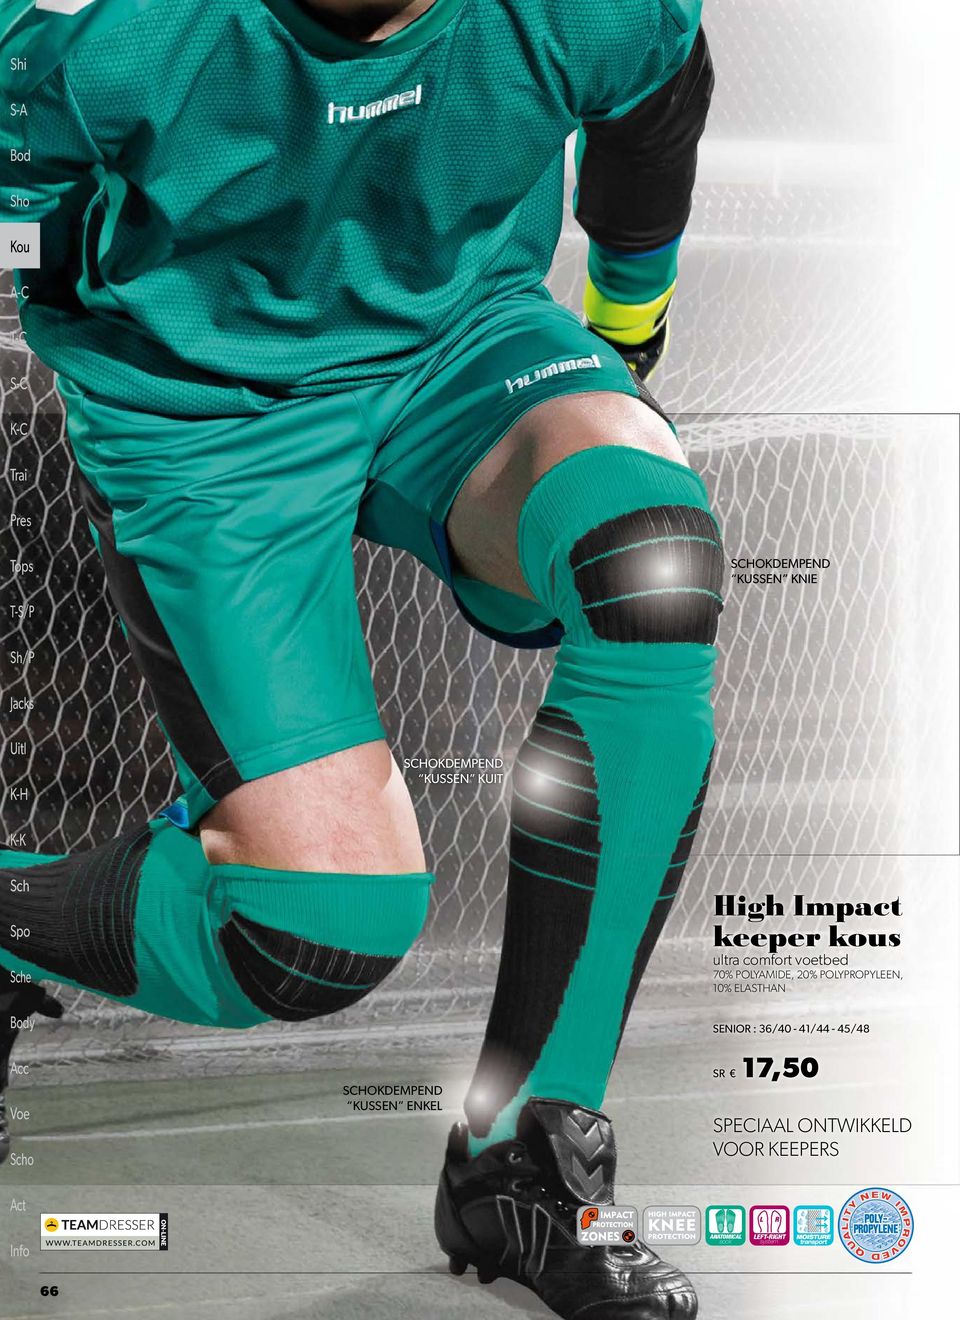 ONTWIKKELD VOOR KEEPERS L R BREATHABLE PREVENT & STABILISING FLEXIBLE AL LEFT-RIGHT RECOVER sock system